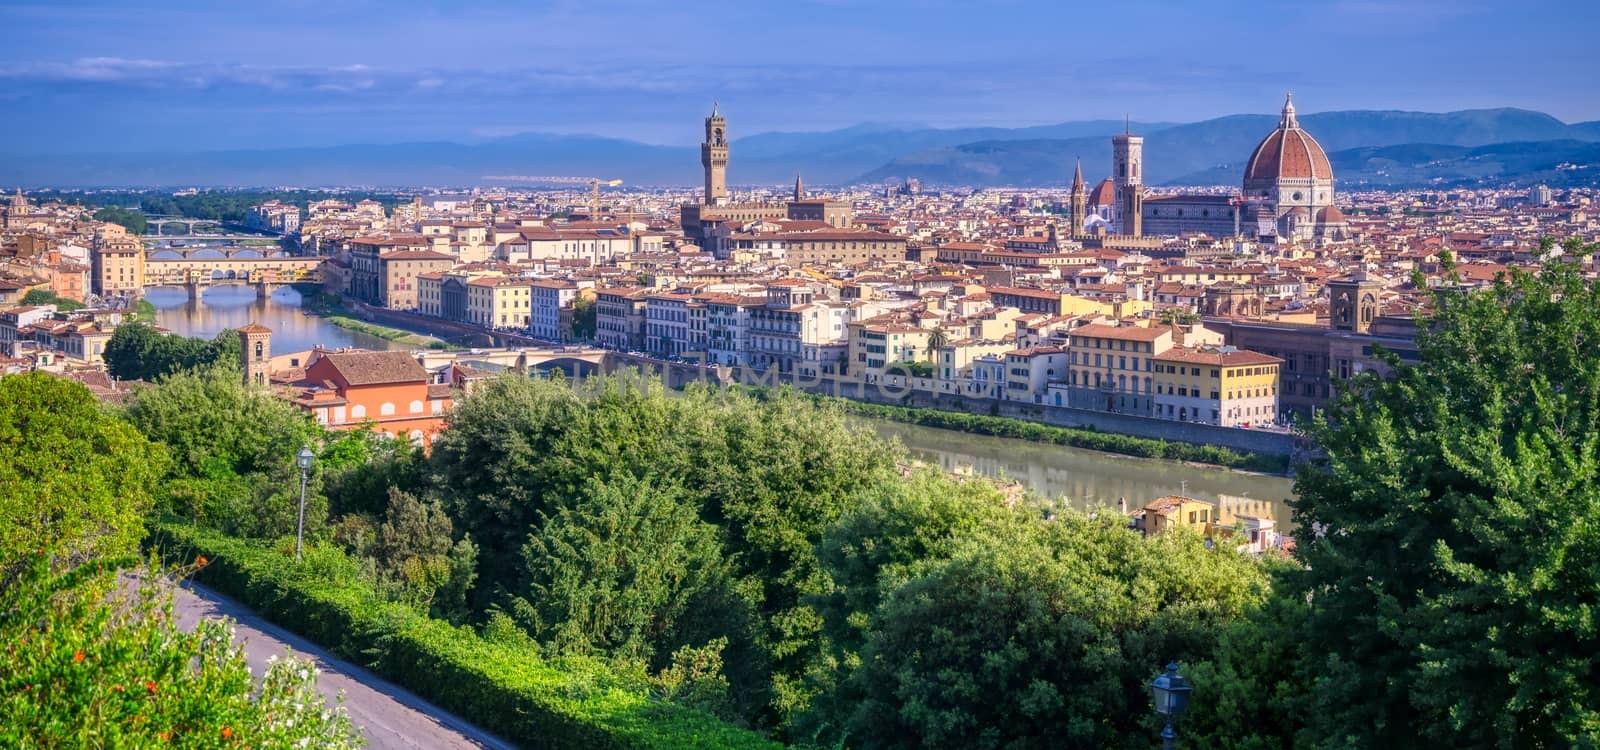 Aerial view of Florence, Italy by jbyard22